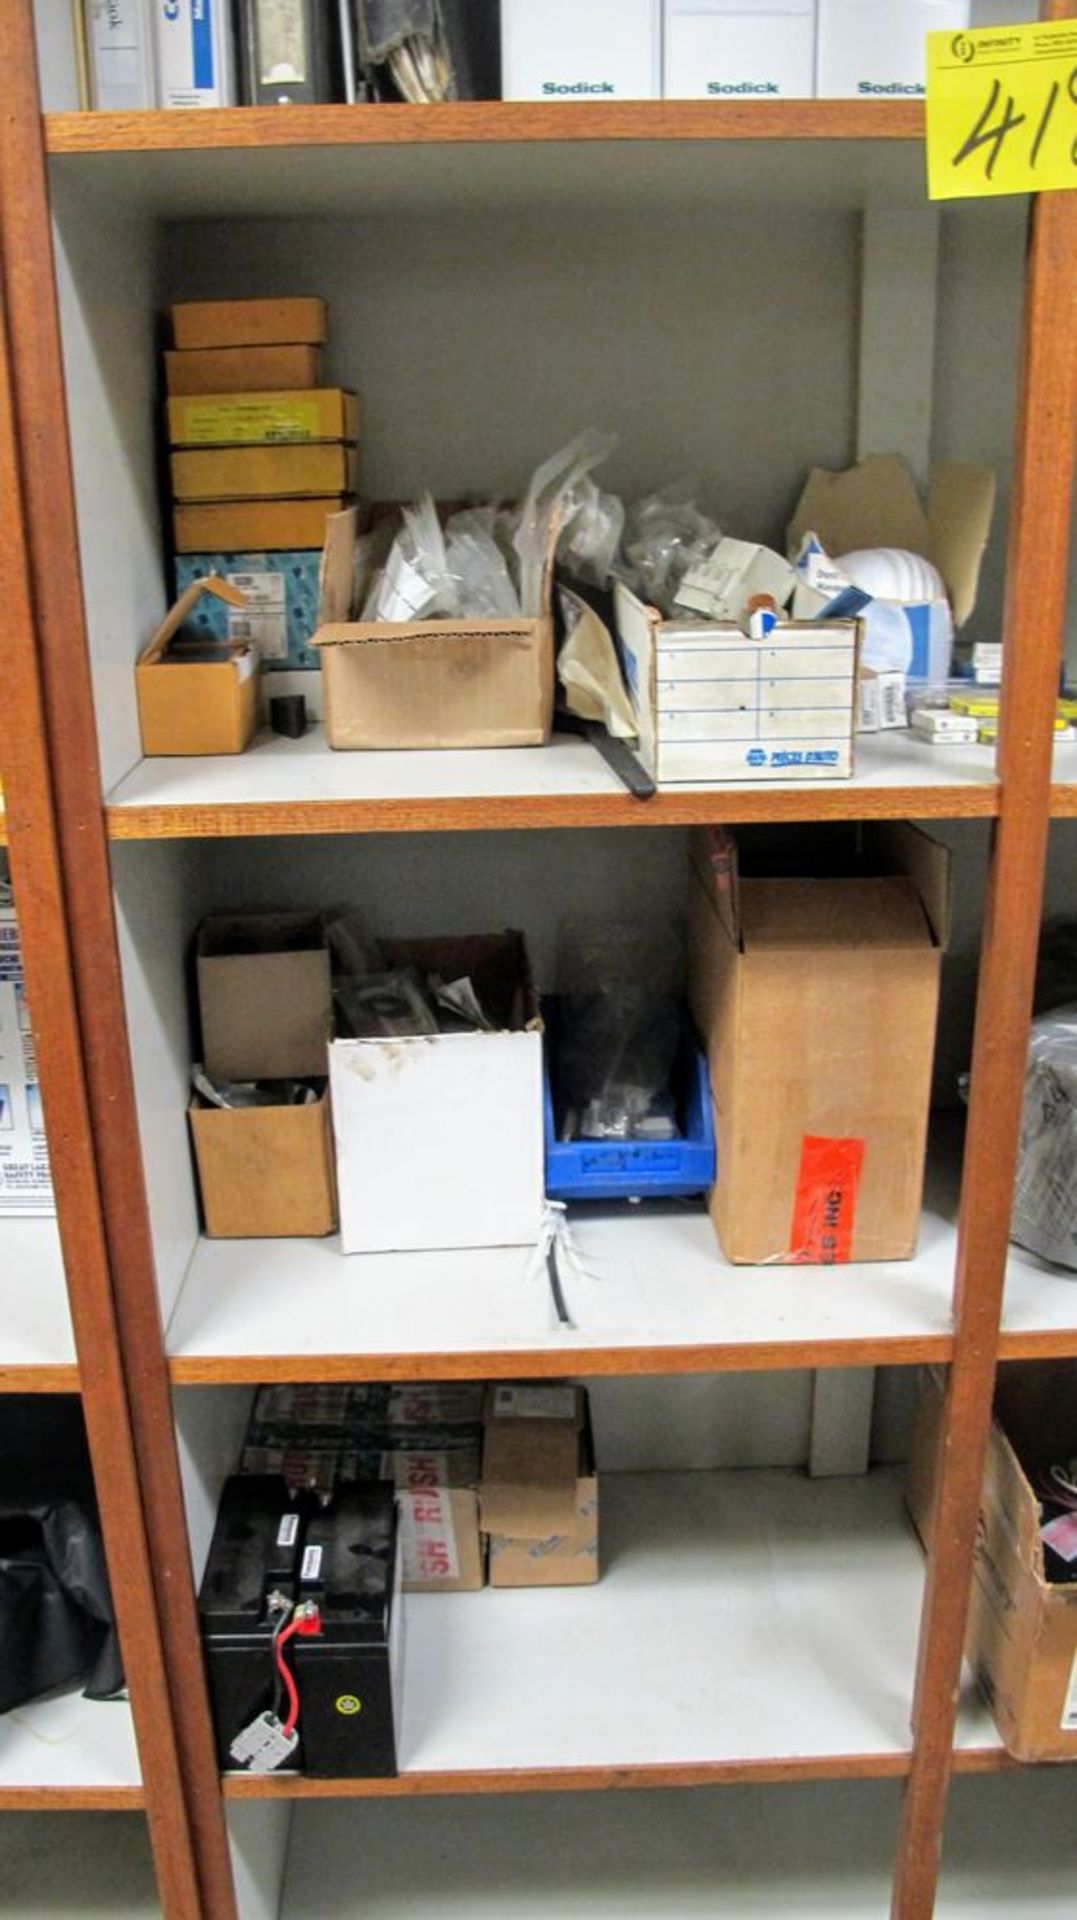 CONTENTS OF PLANT MANAGER'S OFFICE, FIRST AID SUPPLIES, FUSES, BATTERIES, MOTOR, SHELVES, DESKS, - Image 2 of 6